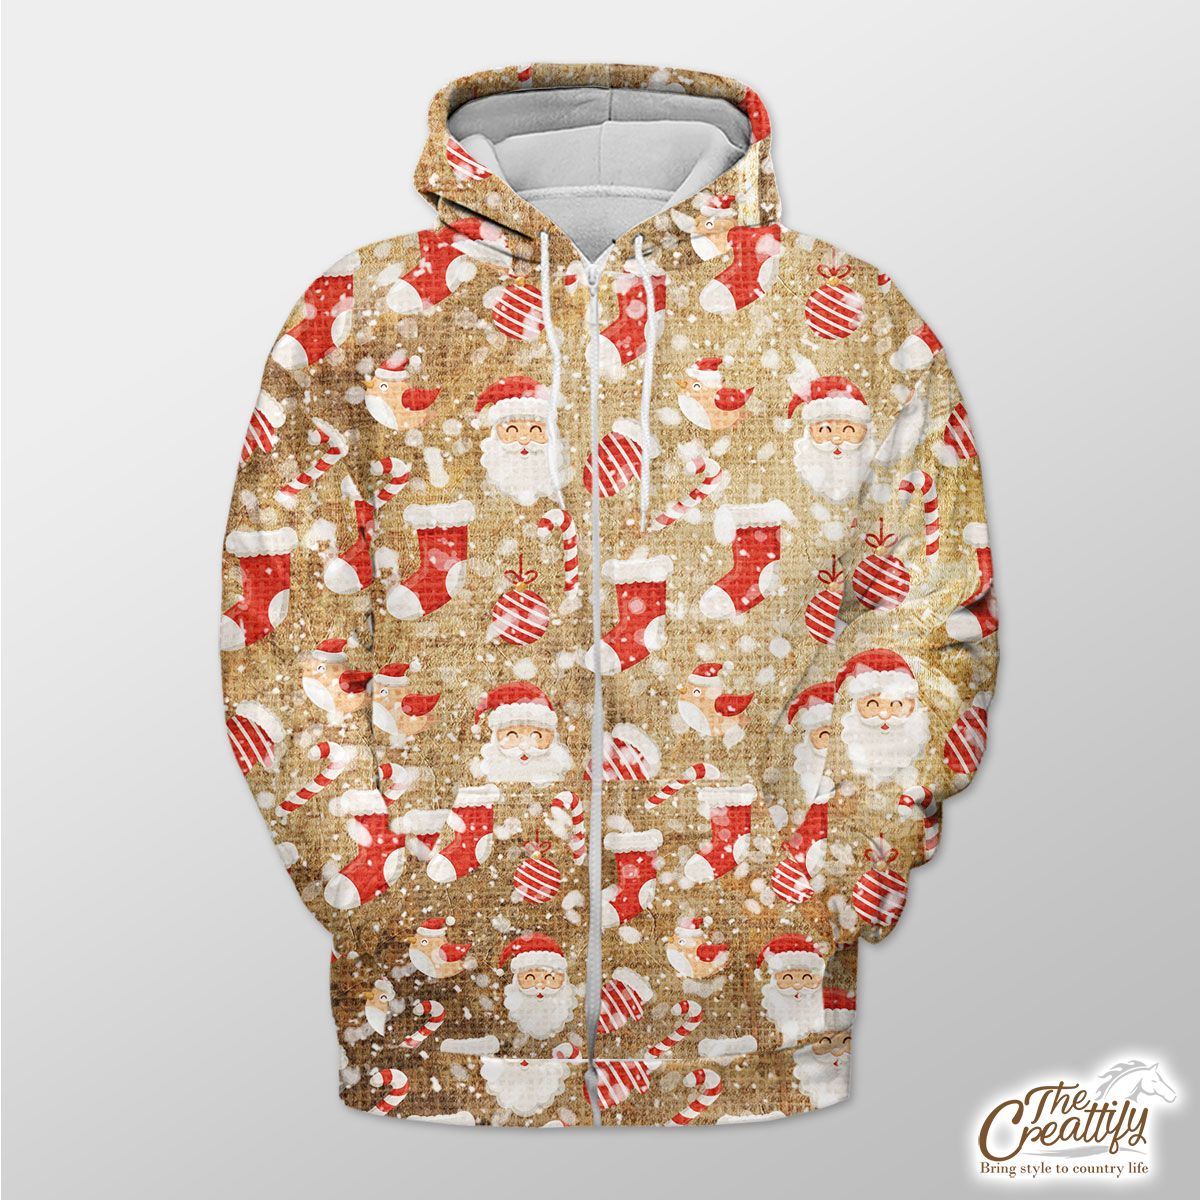 Santa Clause, Red Socks, Candy Canes And Cardinal Bird On Snowflake Zip Hoodie